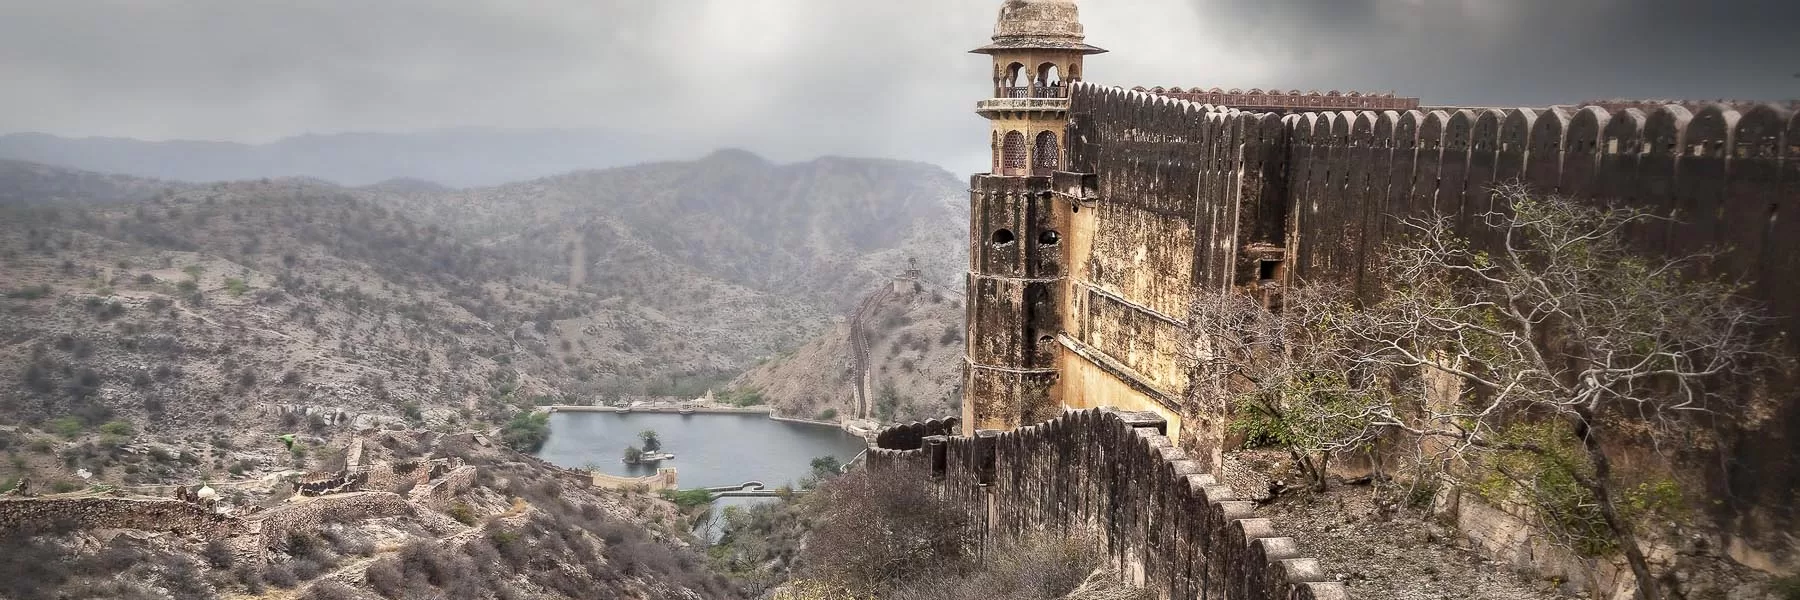 10 must see forts of Rajasthan